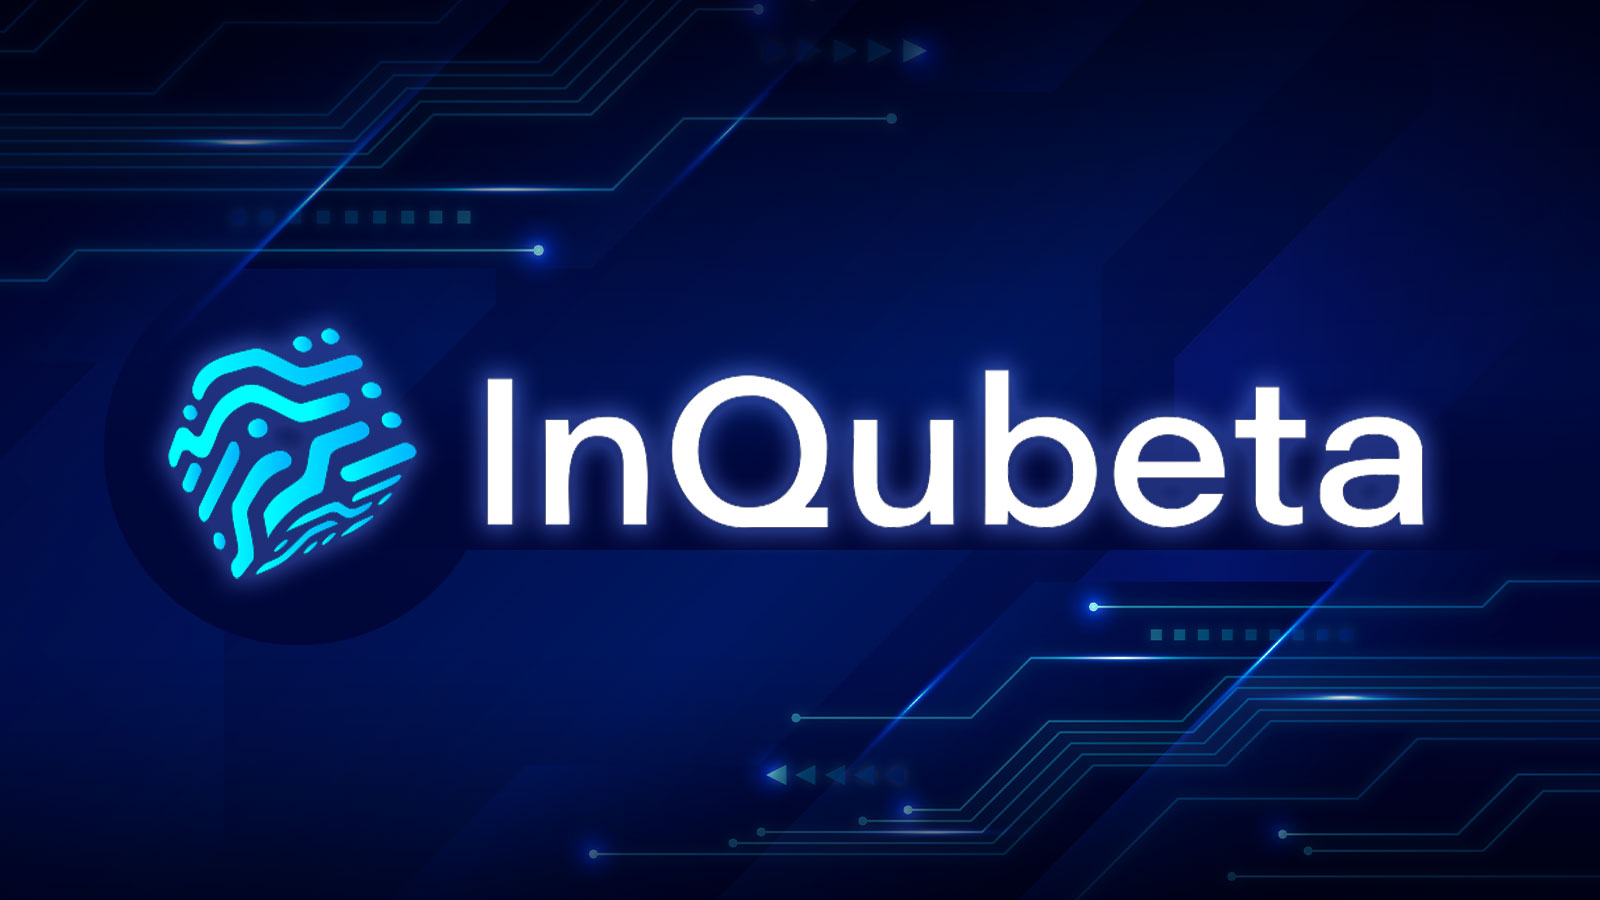 InQubeta (QUBE) Sale New Phase Gains Support This January as Aave (AAVE), Chainlink (LINK) Ready for Major Announcements